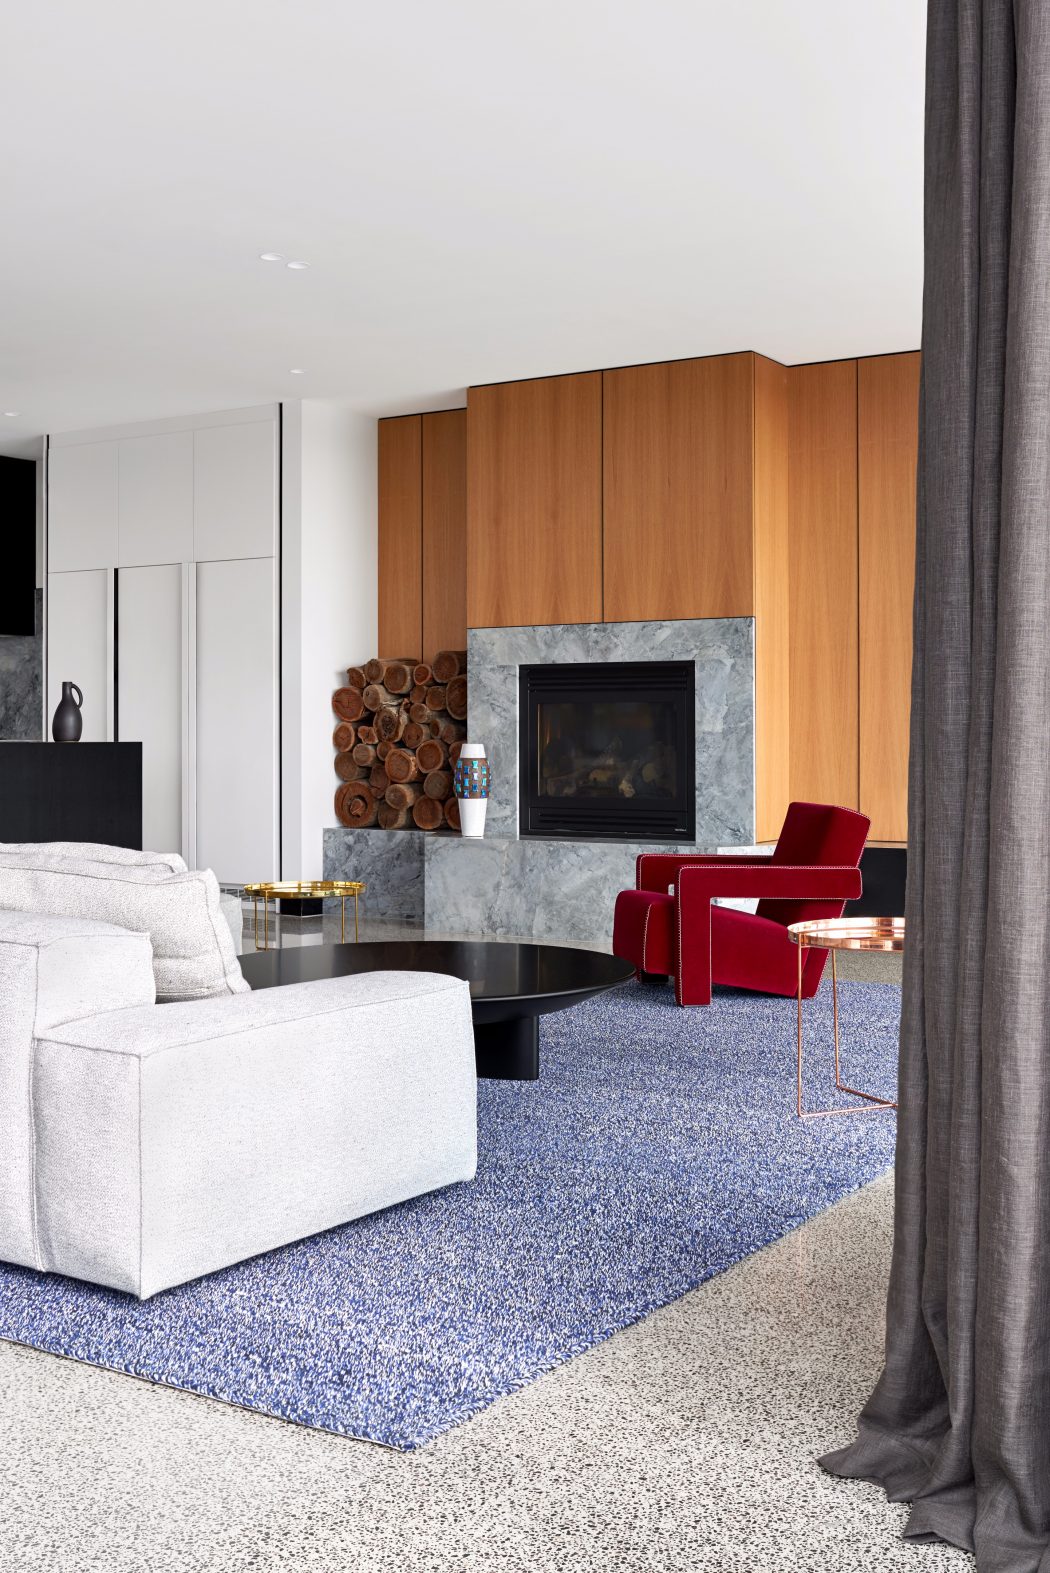 Stylish modern living room with wood-paneled wall, marble fireplace, and plush seating.